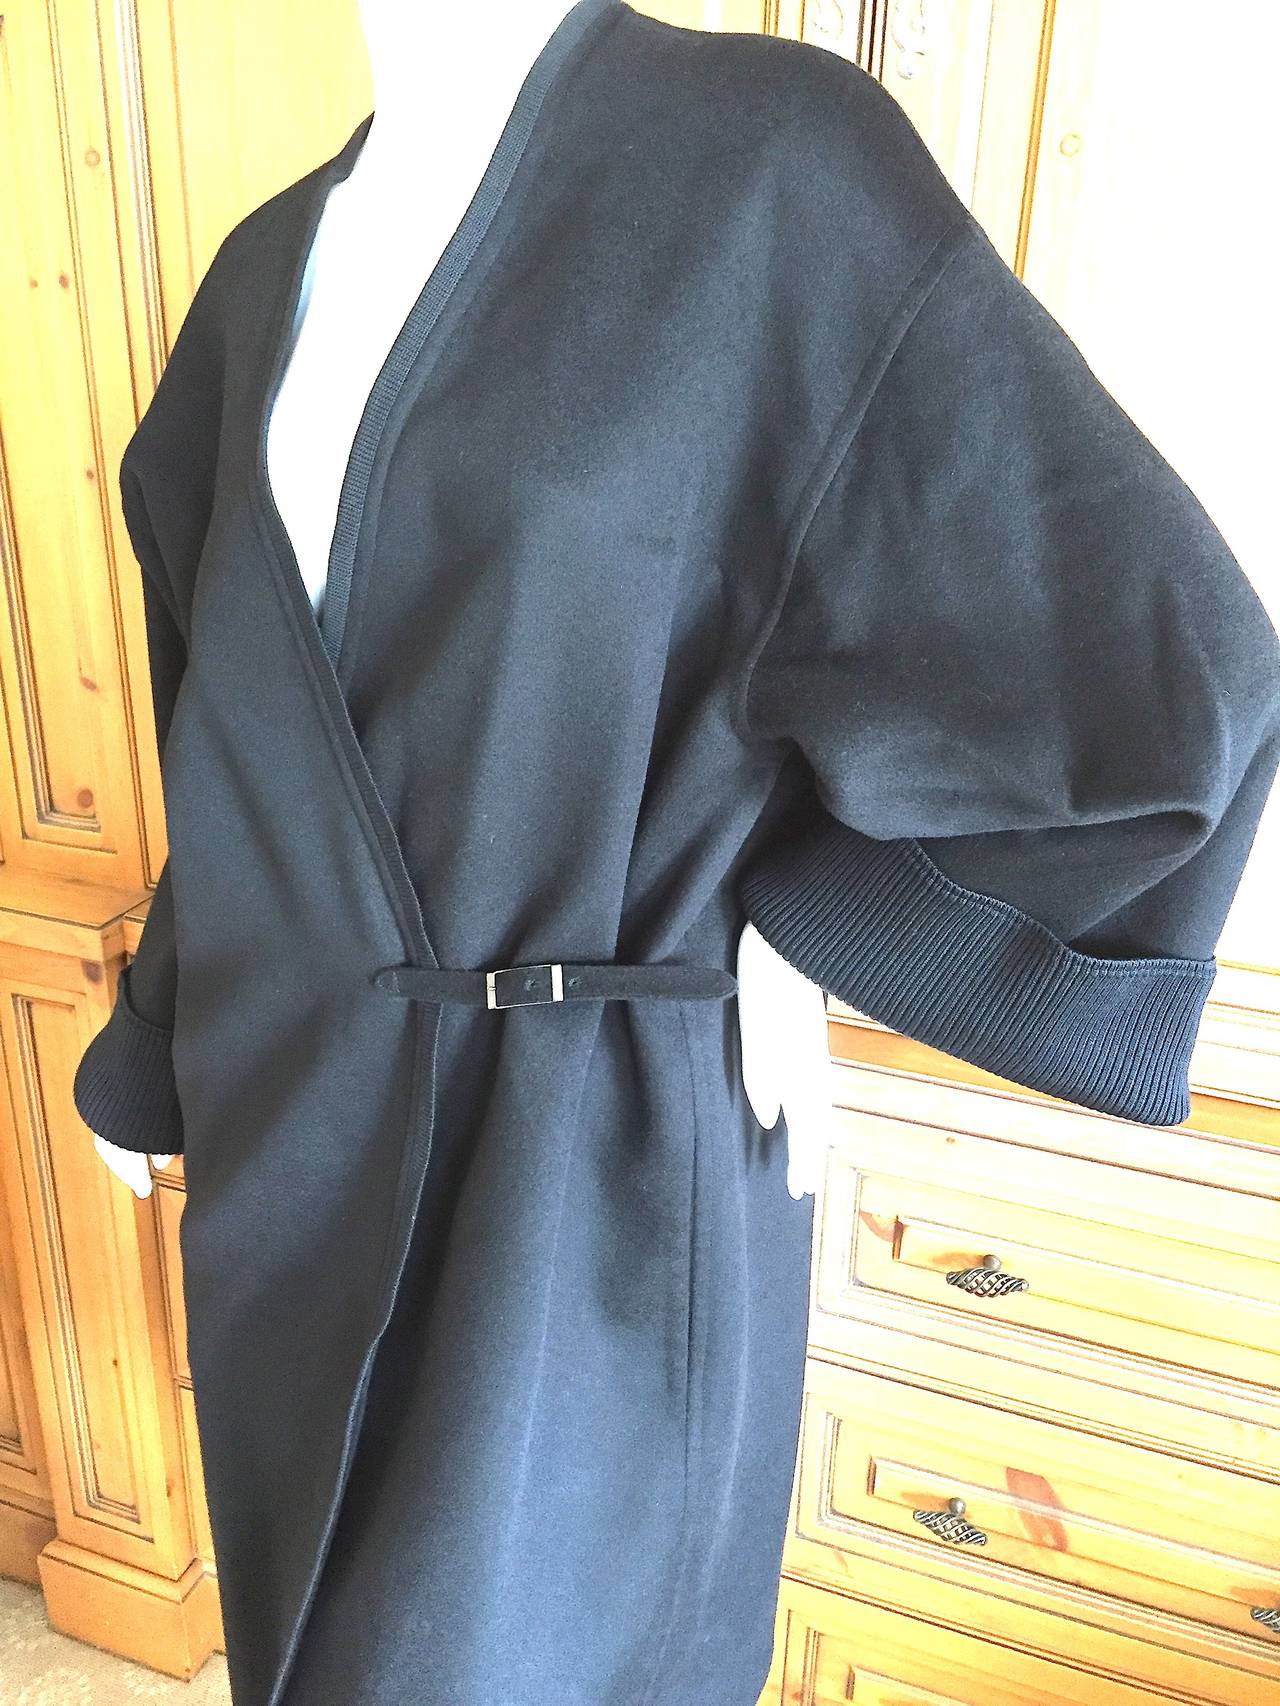 Hermes by Martin Margiela Luxurious Pure Cashmere Coat with Ribbed Cuffs 
There is a leather buckle closure on the side
Made in France
Size 36
This is cut loosly and runs large for the size

Bust 46